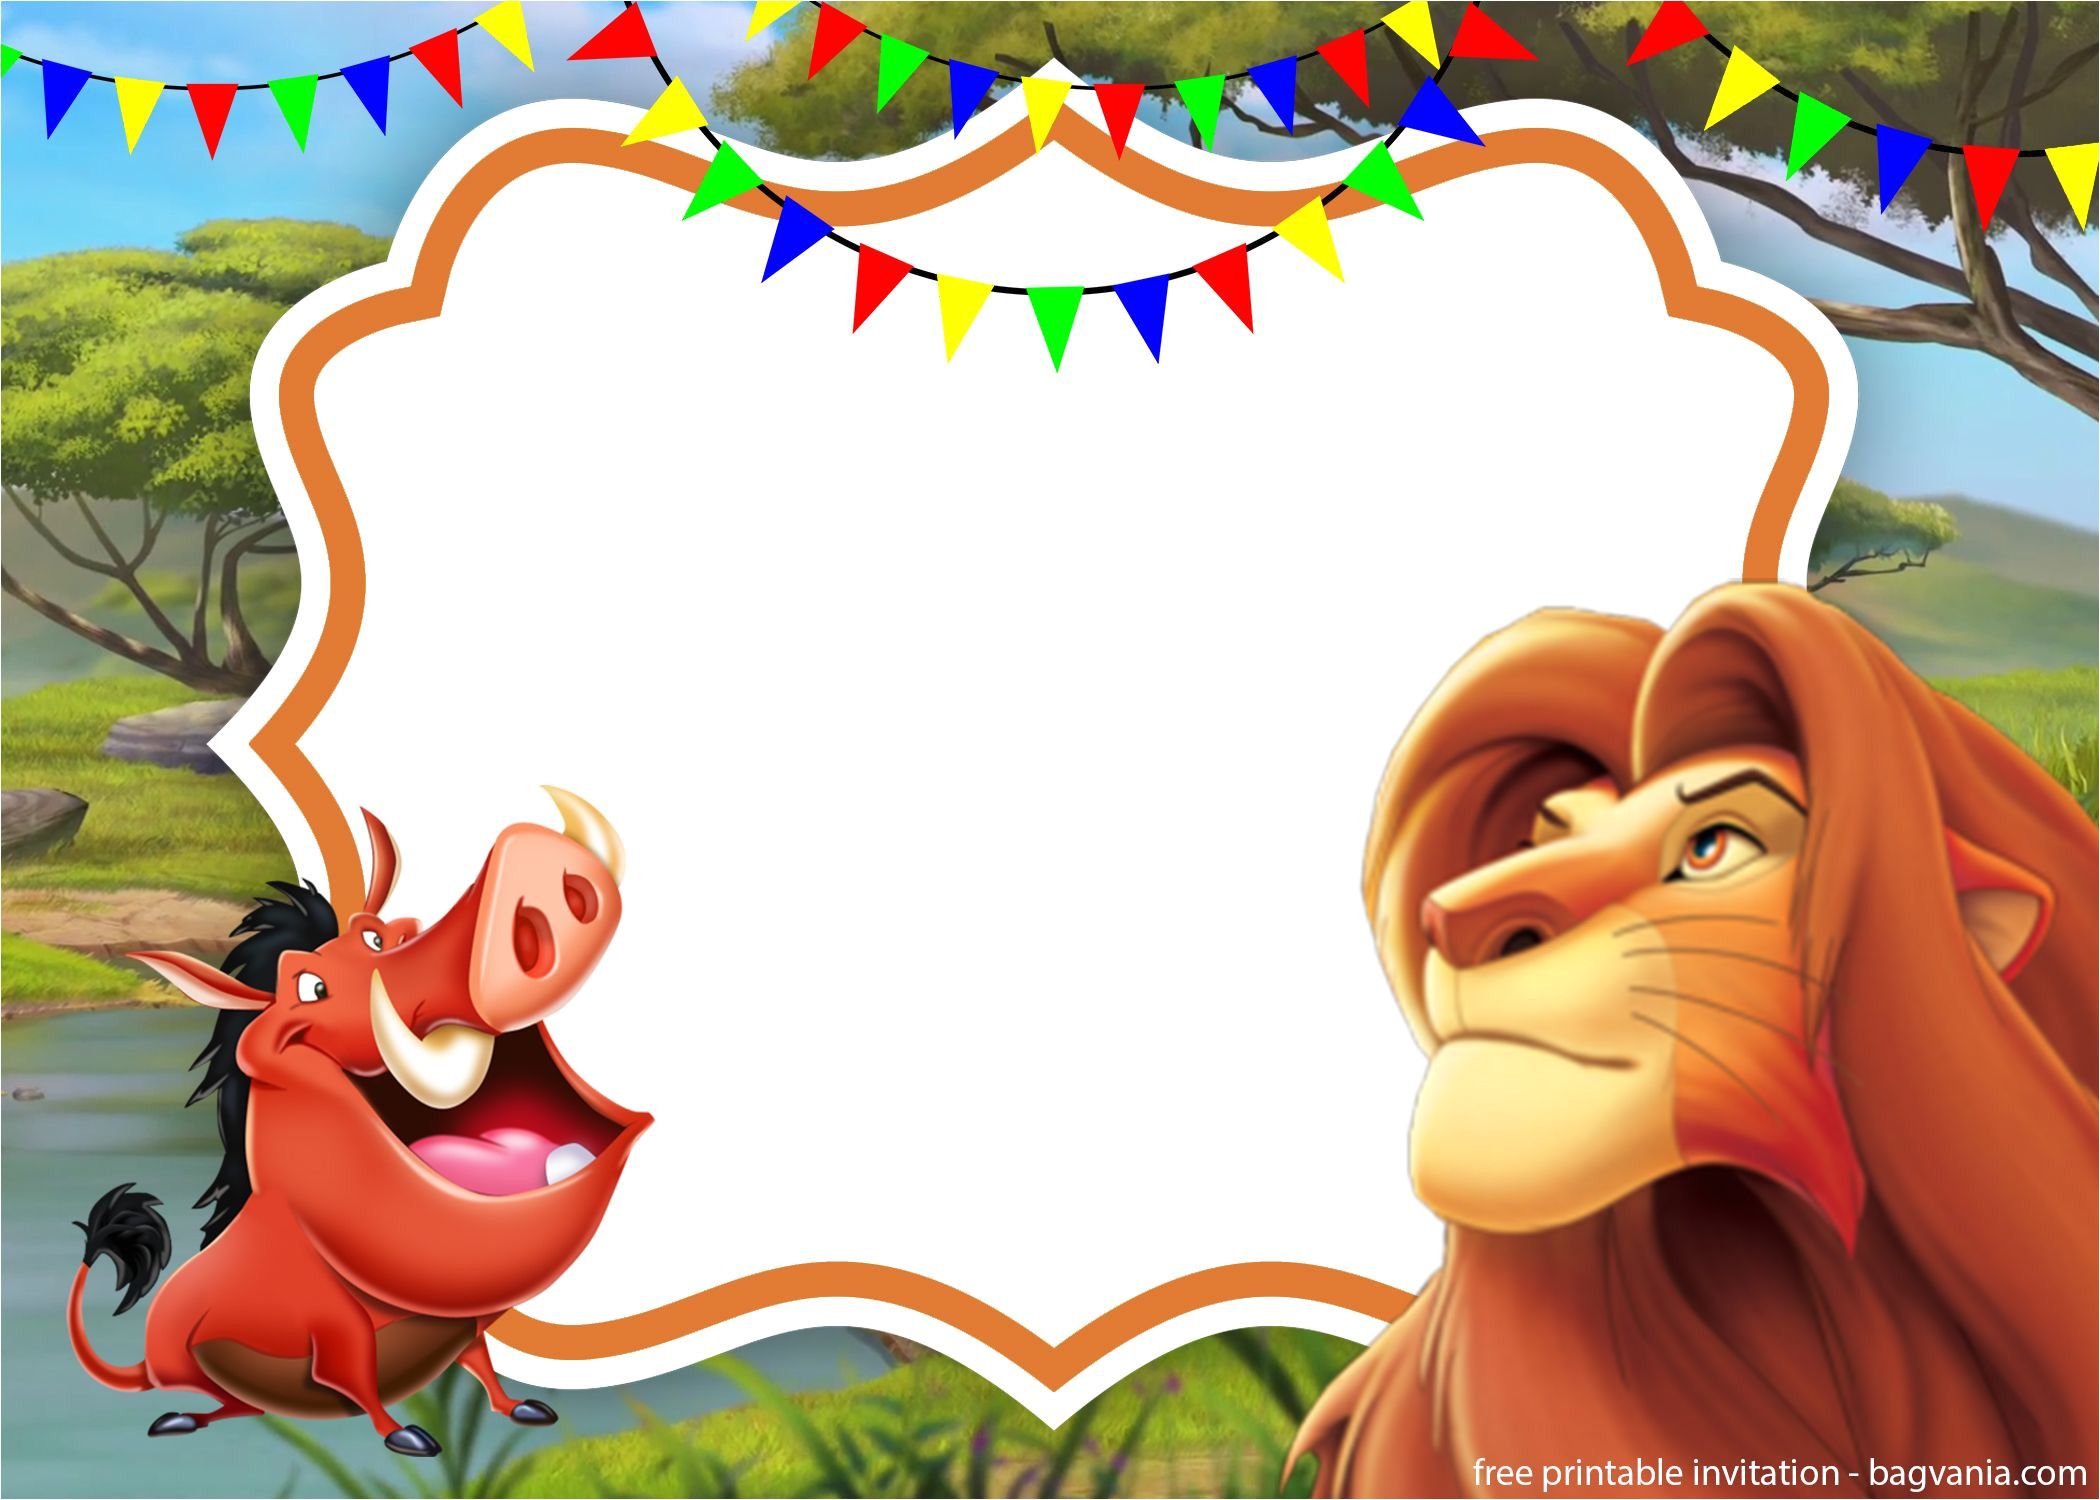 simba lion king invitation template perfect for parties in the yard